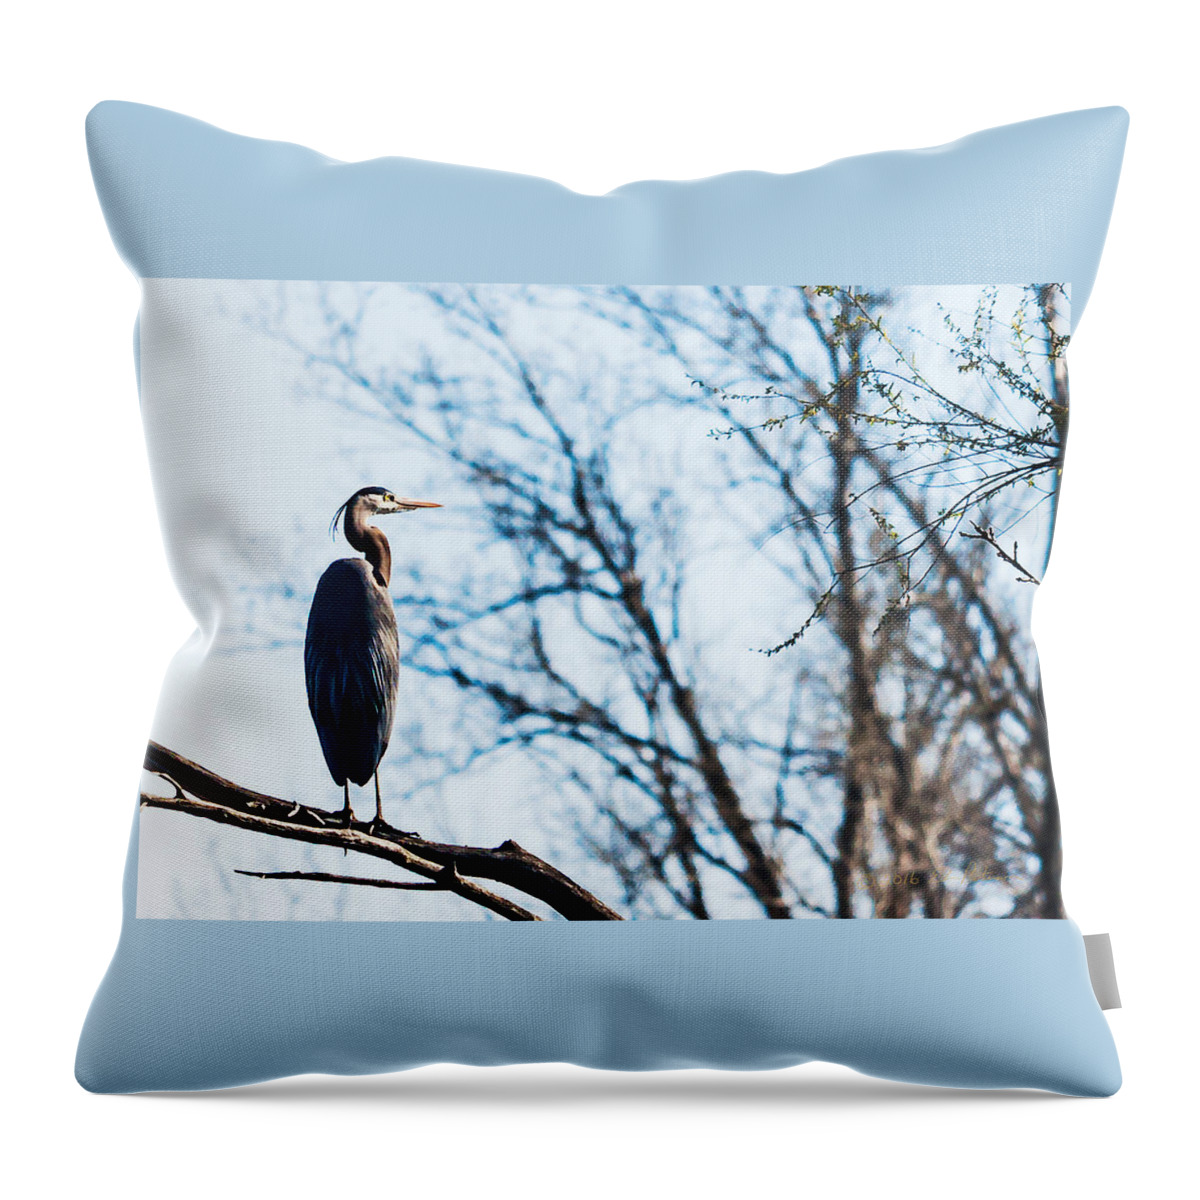 Great Blue Heron Throw Pillow featuring the photograph Great Blue Heron Sitting In A Tree by Ed Peterson